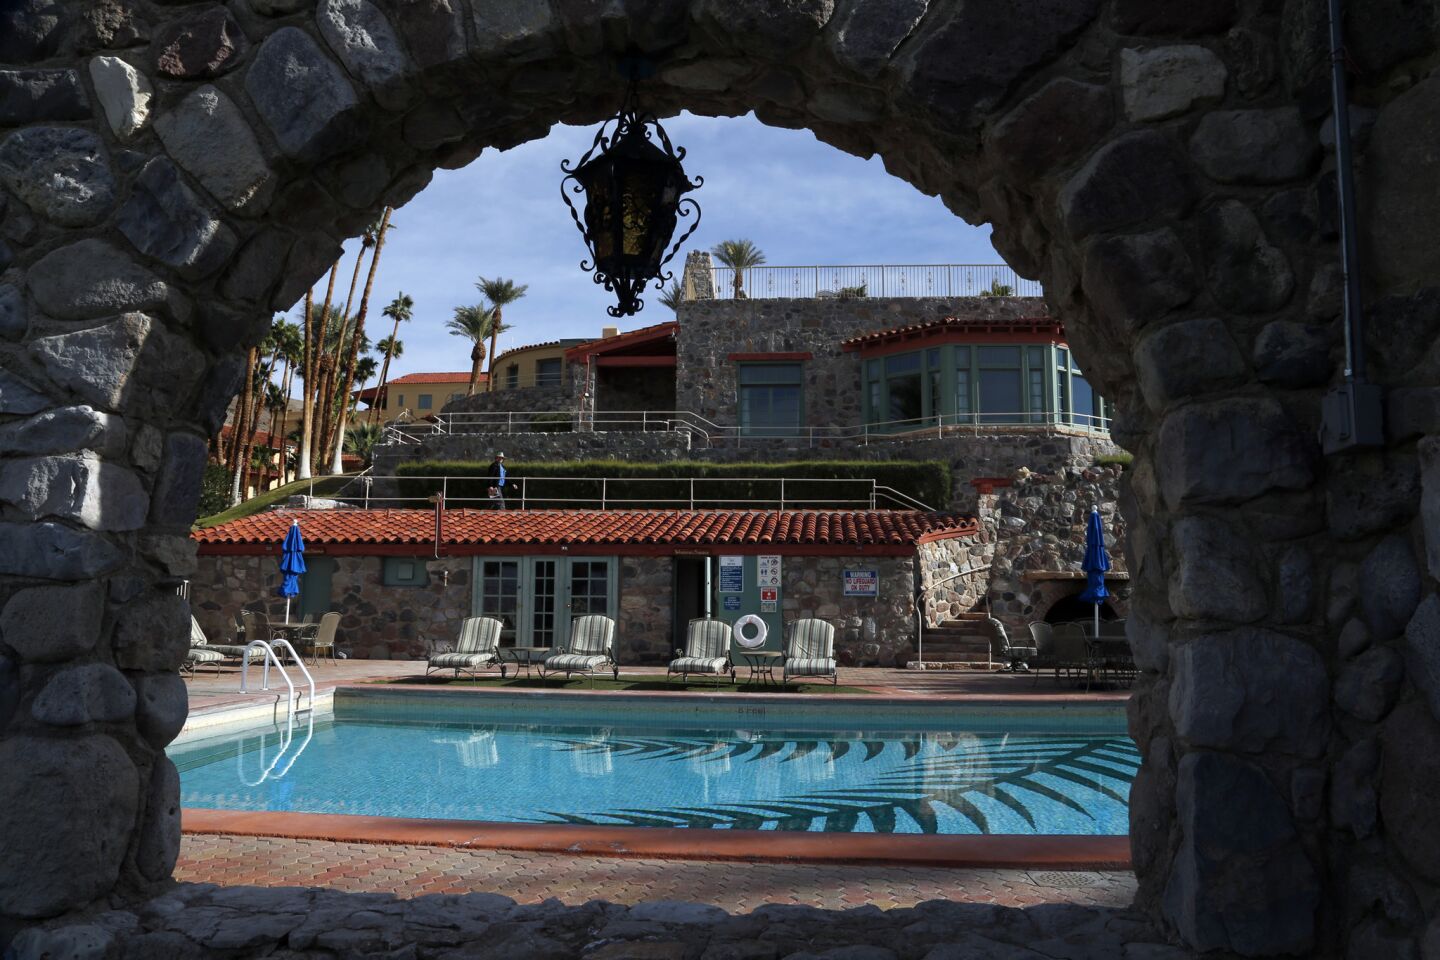 The inn was built by the Pacific Coast Borax Company and opened in 1927 with a spring-fed swimming pool.